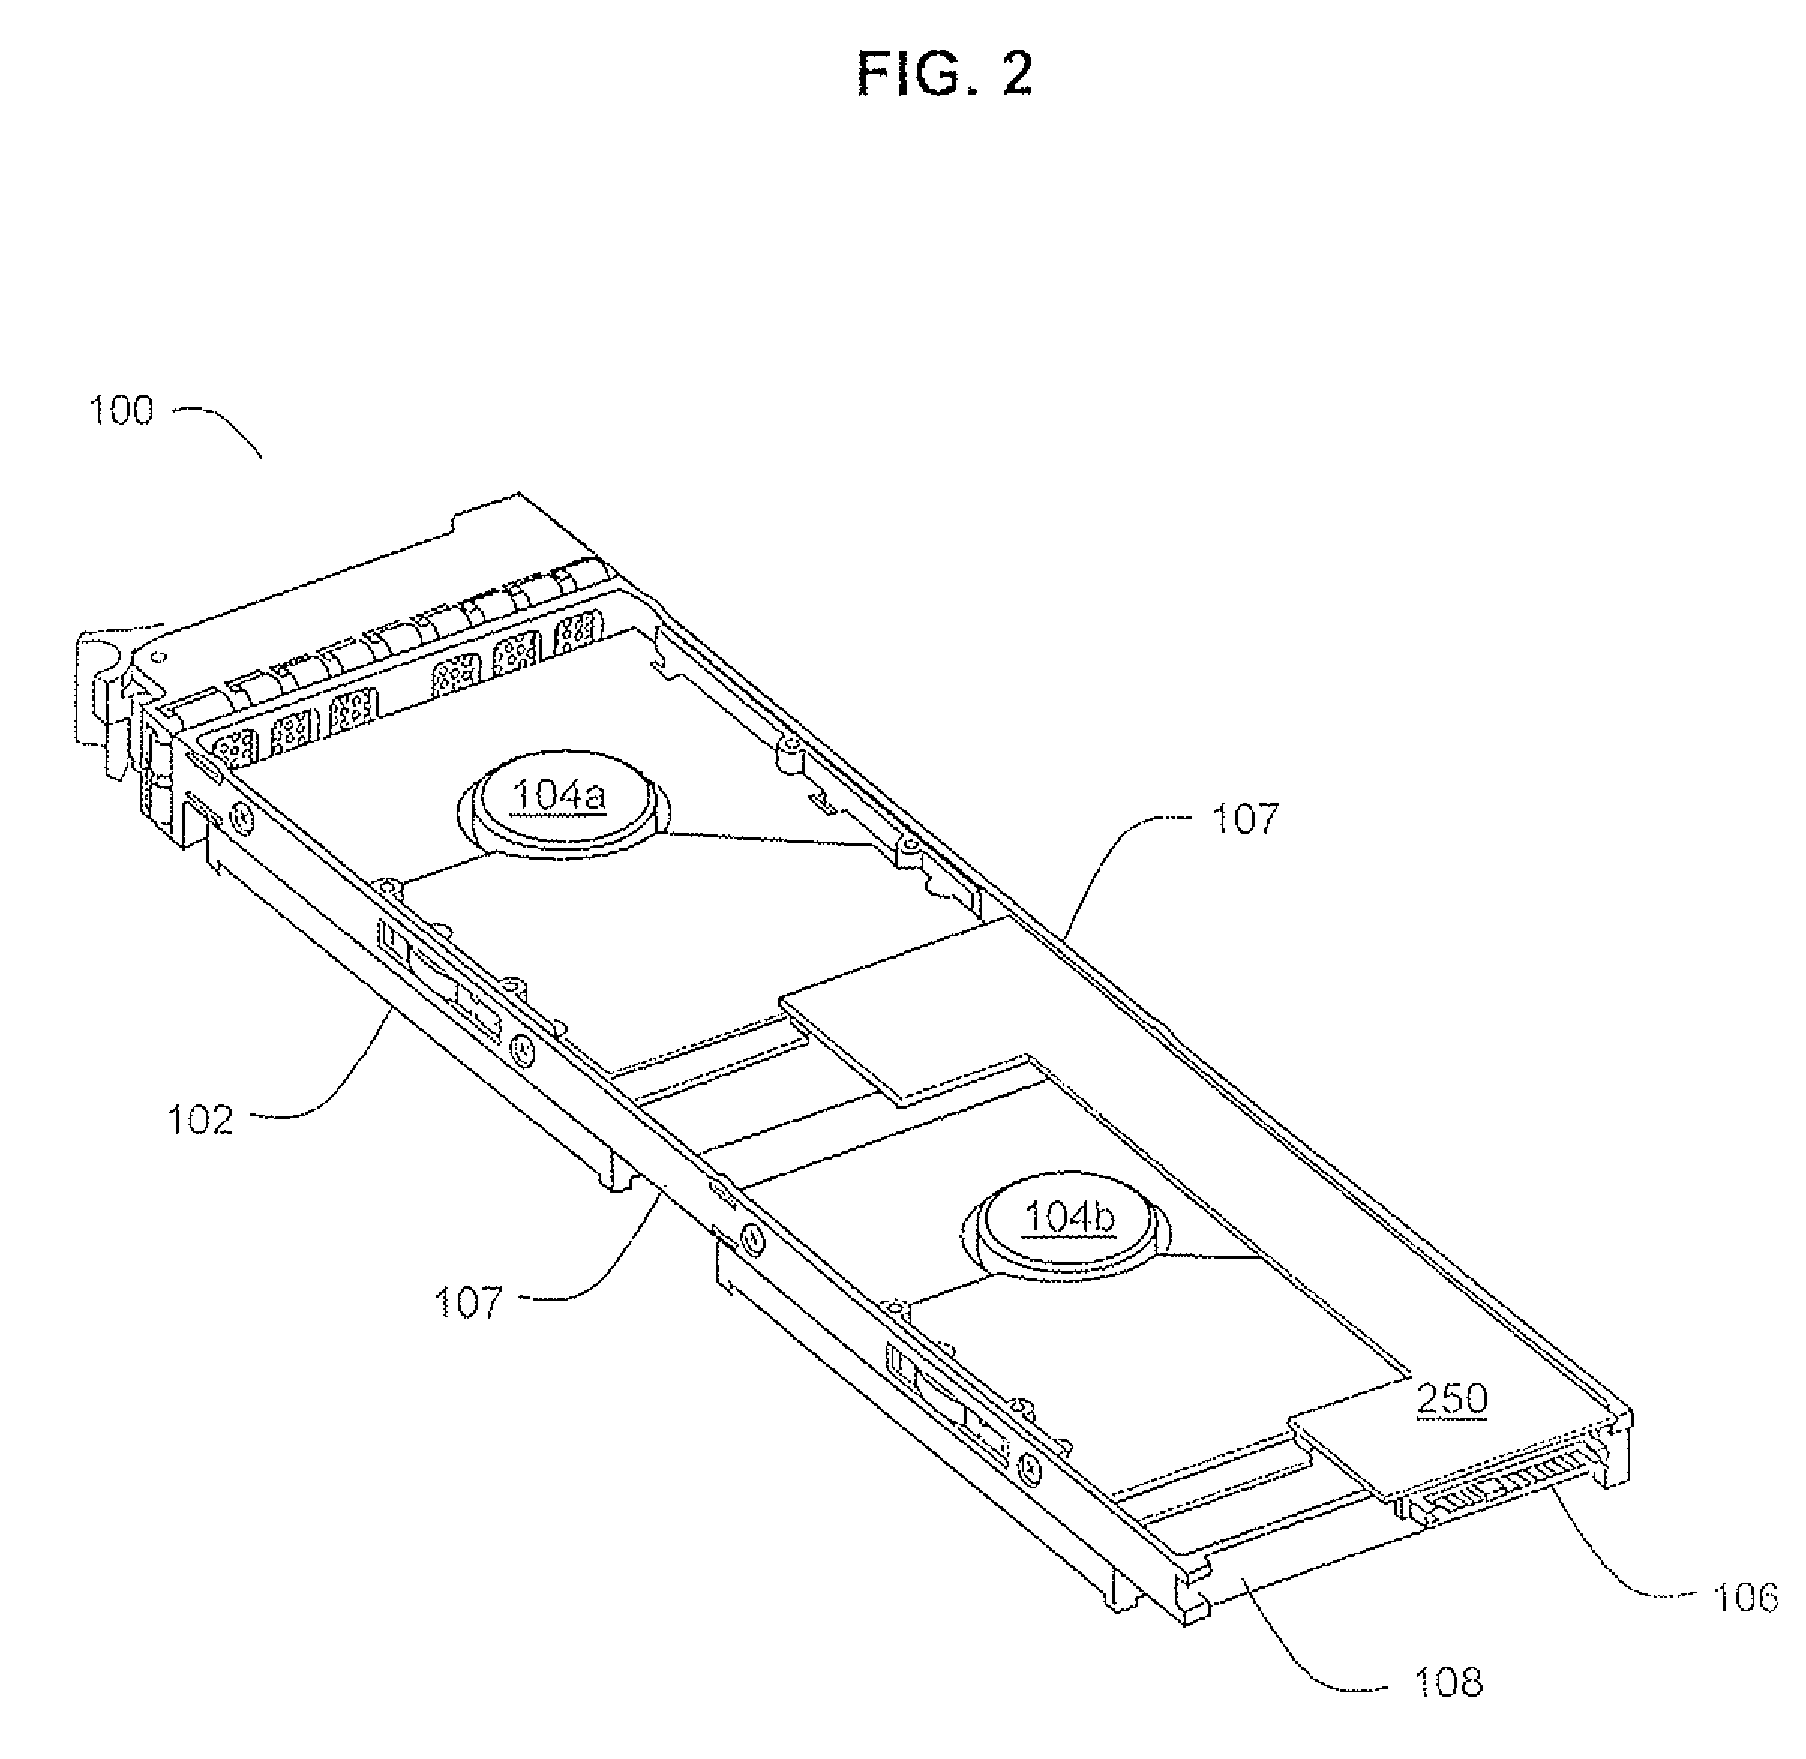 Incorporation of two or more hard disk drives into a single drive carrier with a single midplane connector